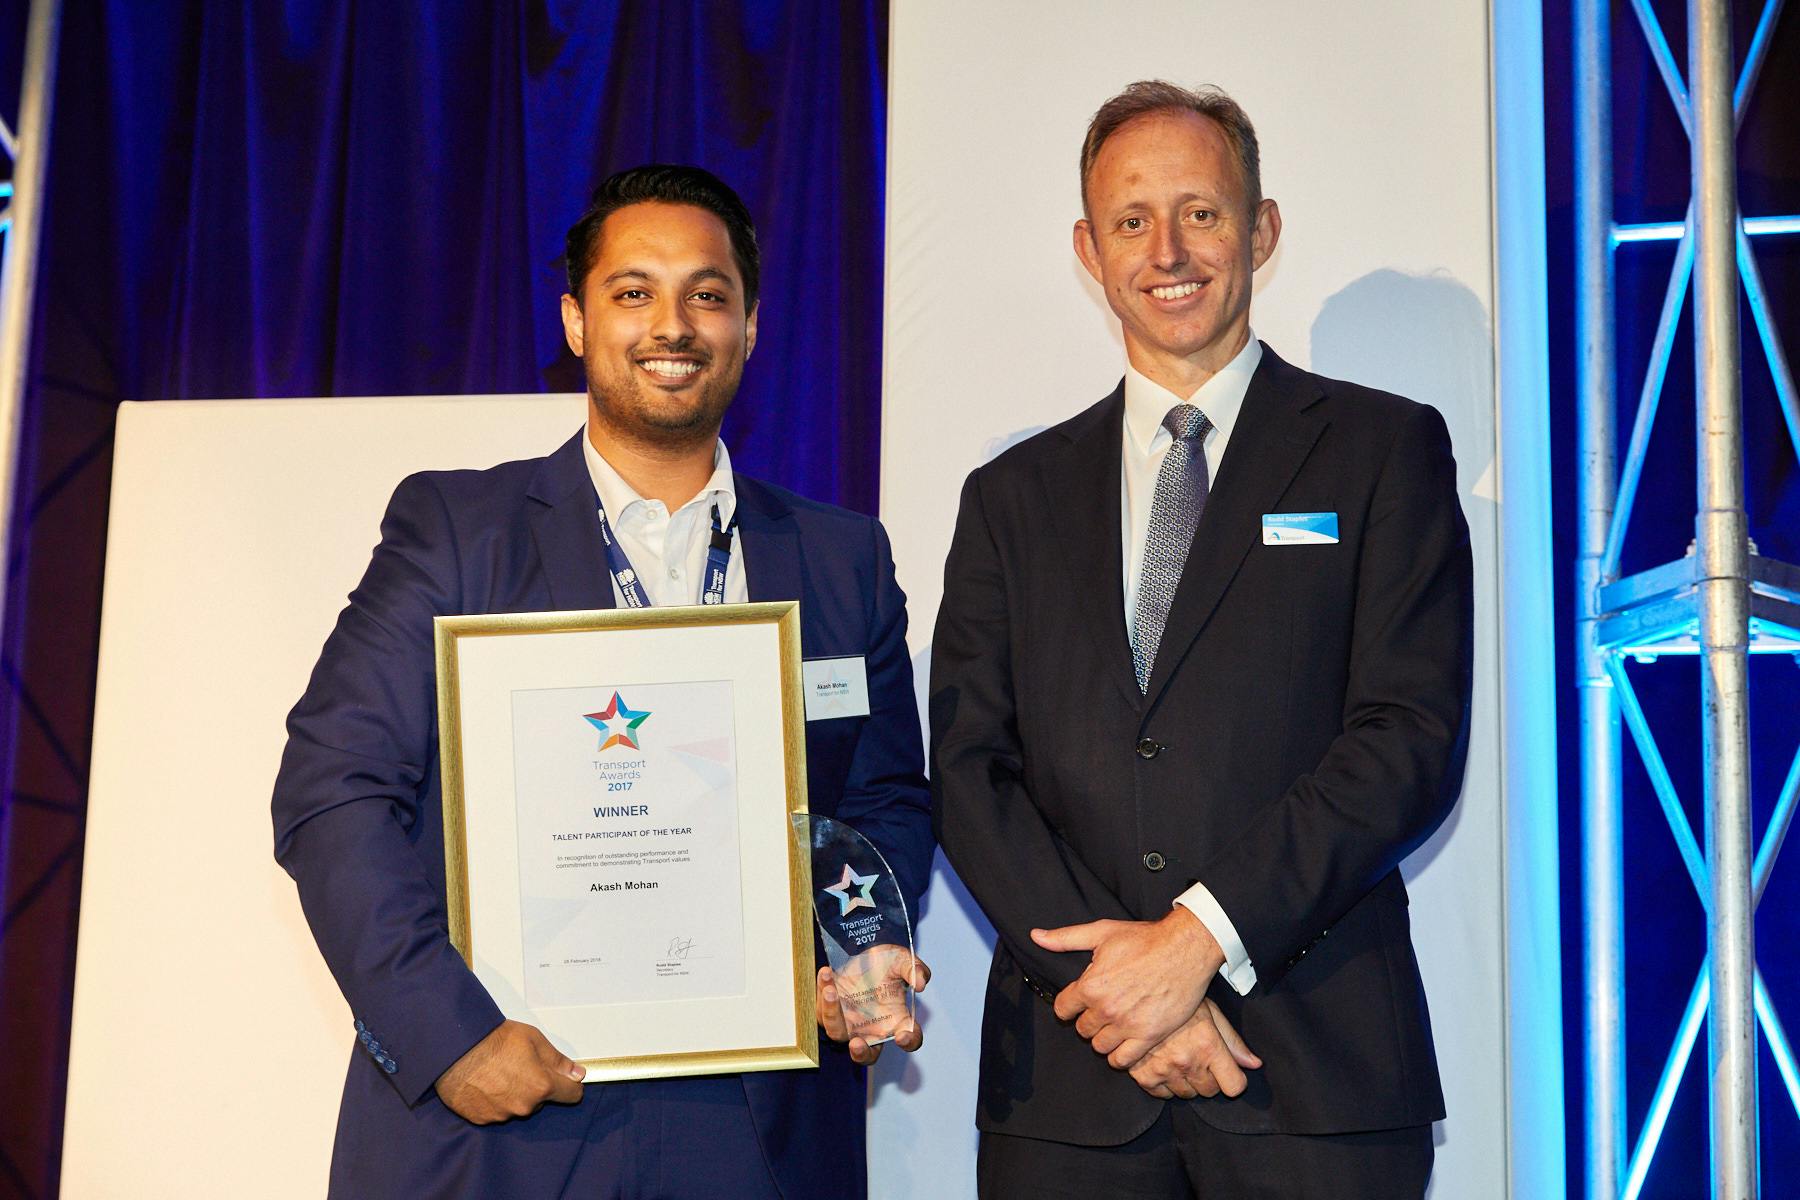 Winner, Talent Participant of the Year Award - Akash Mohan, Transport for NSW.